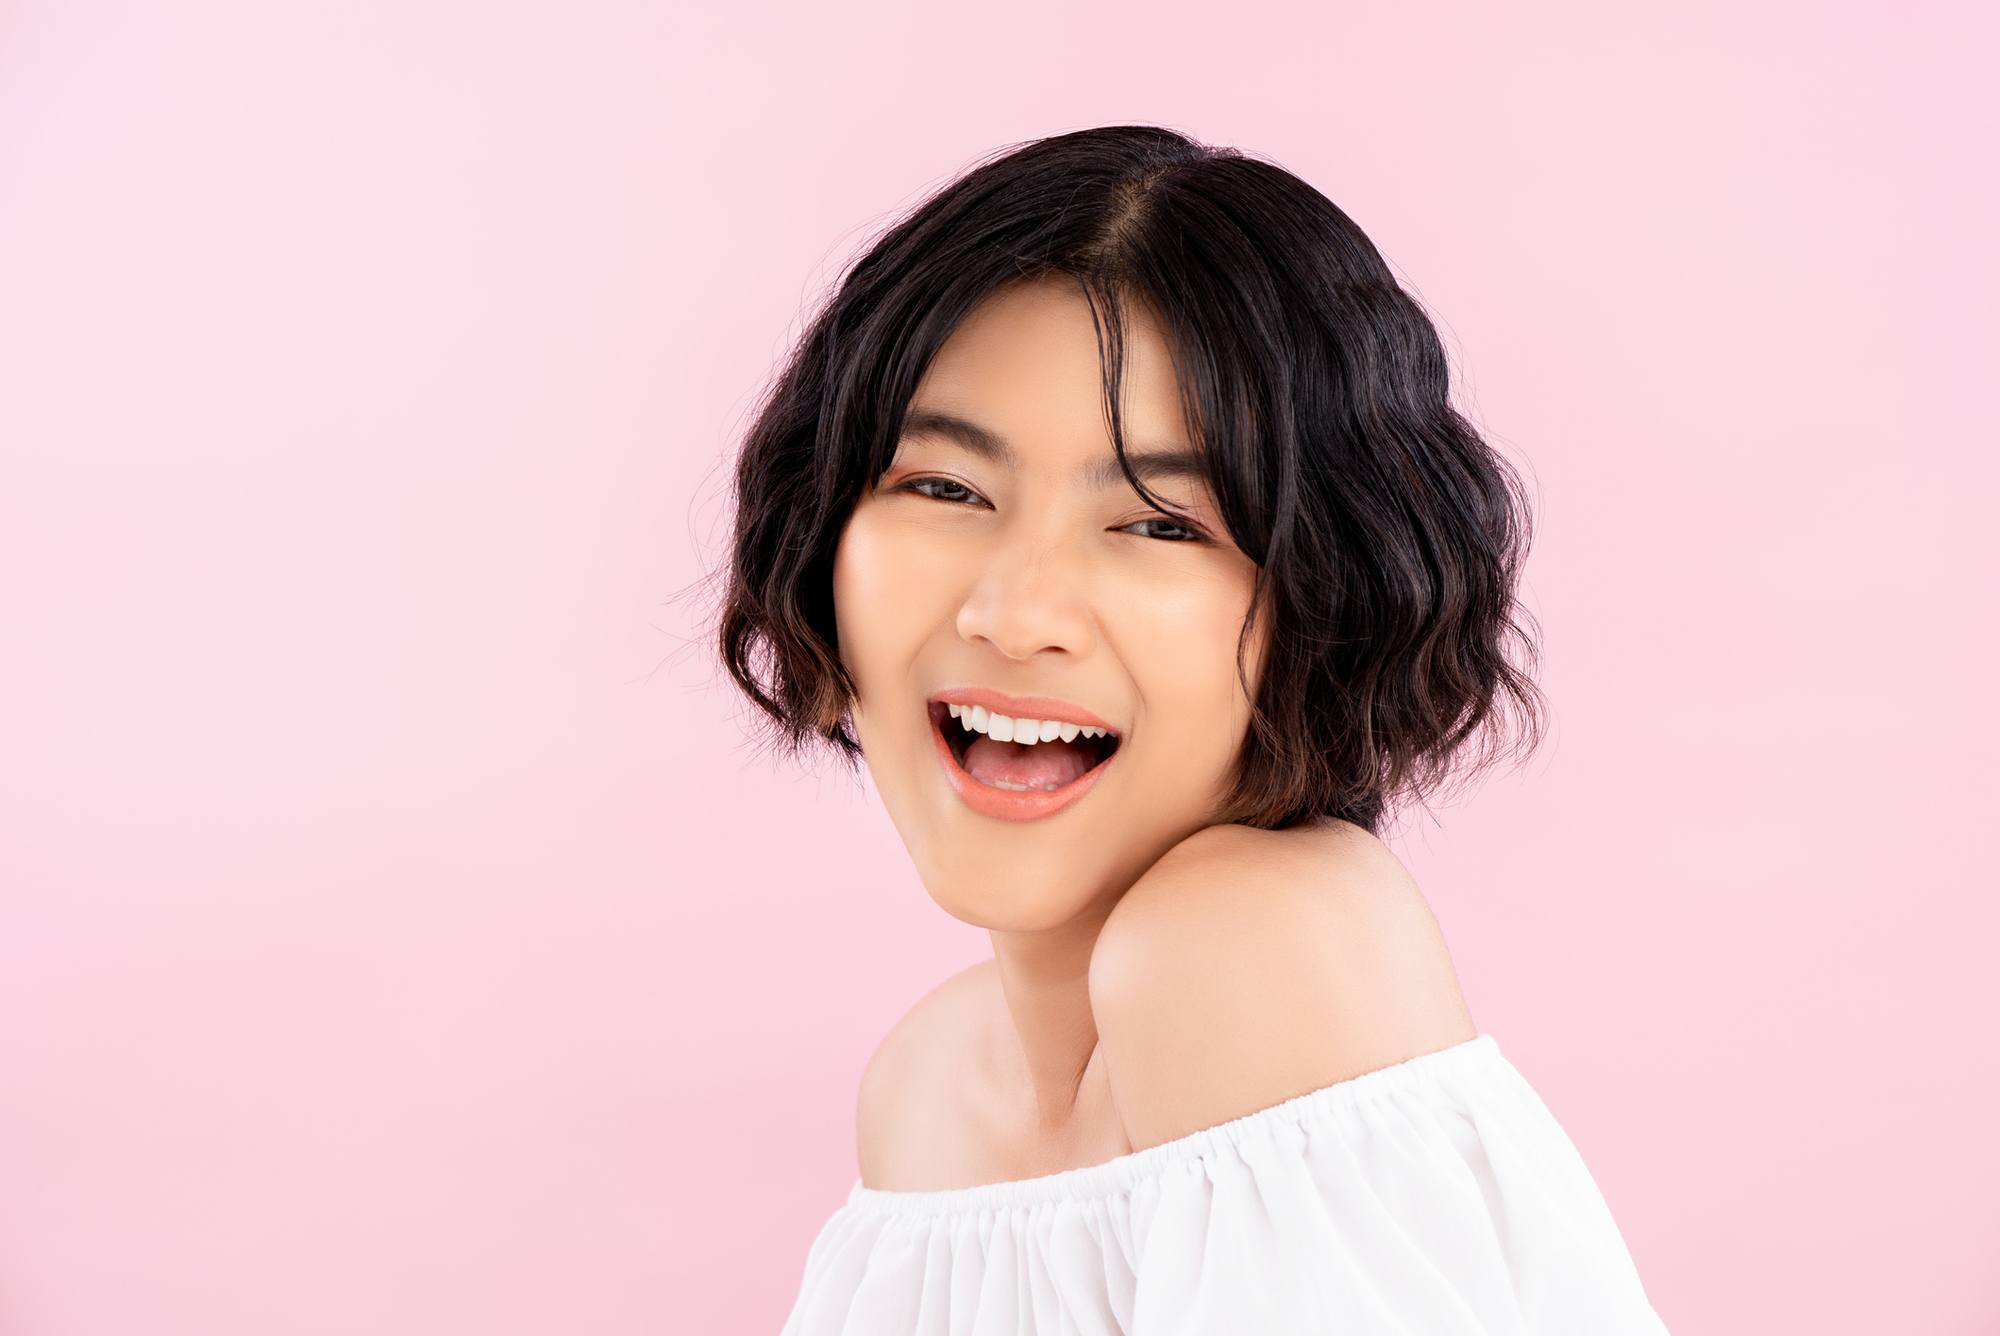 Oriental model with short hair to her cheeks